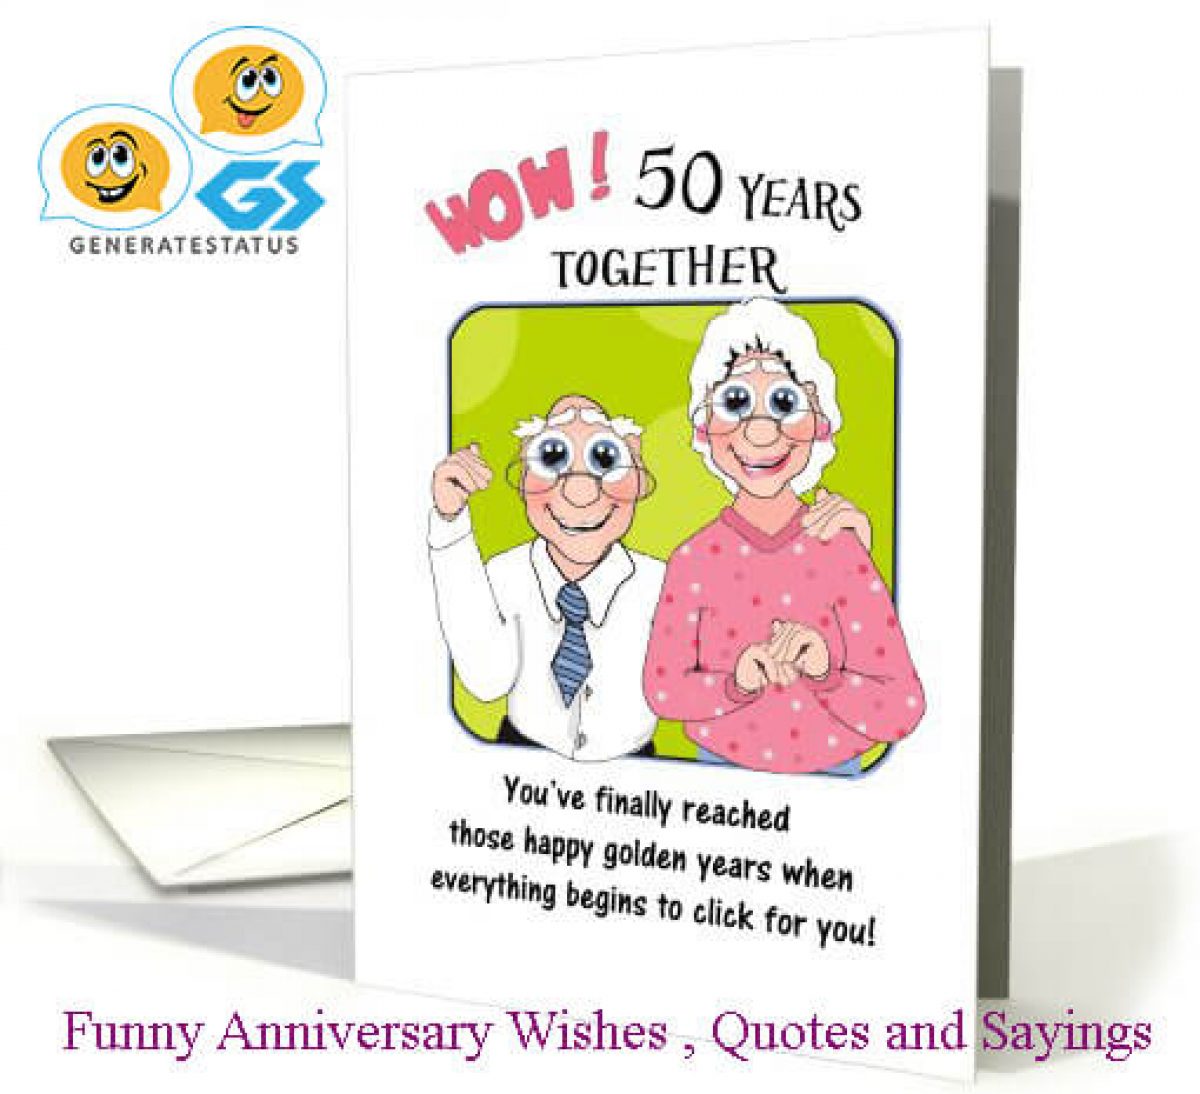 Happy Anniversary Funny Wishes - To Make Them Laugh Madly